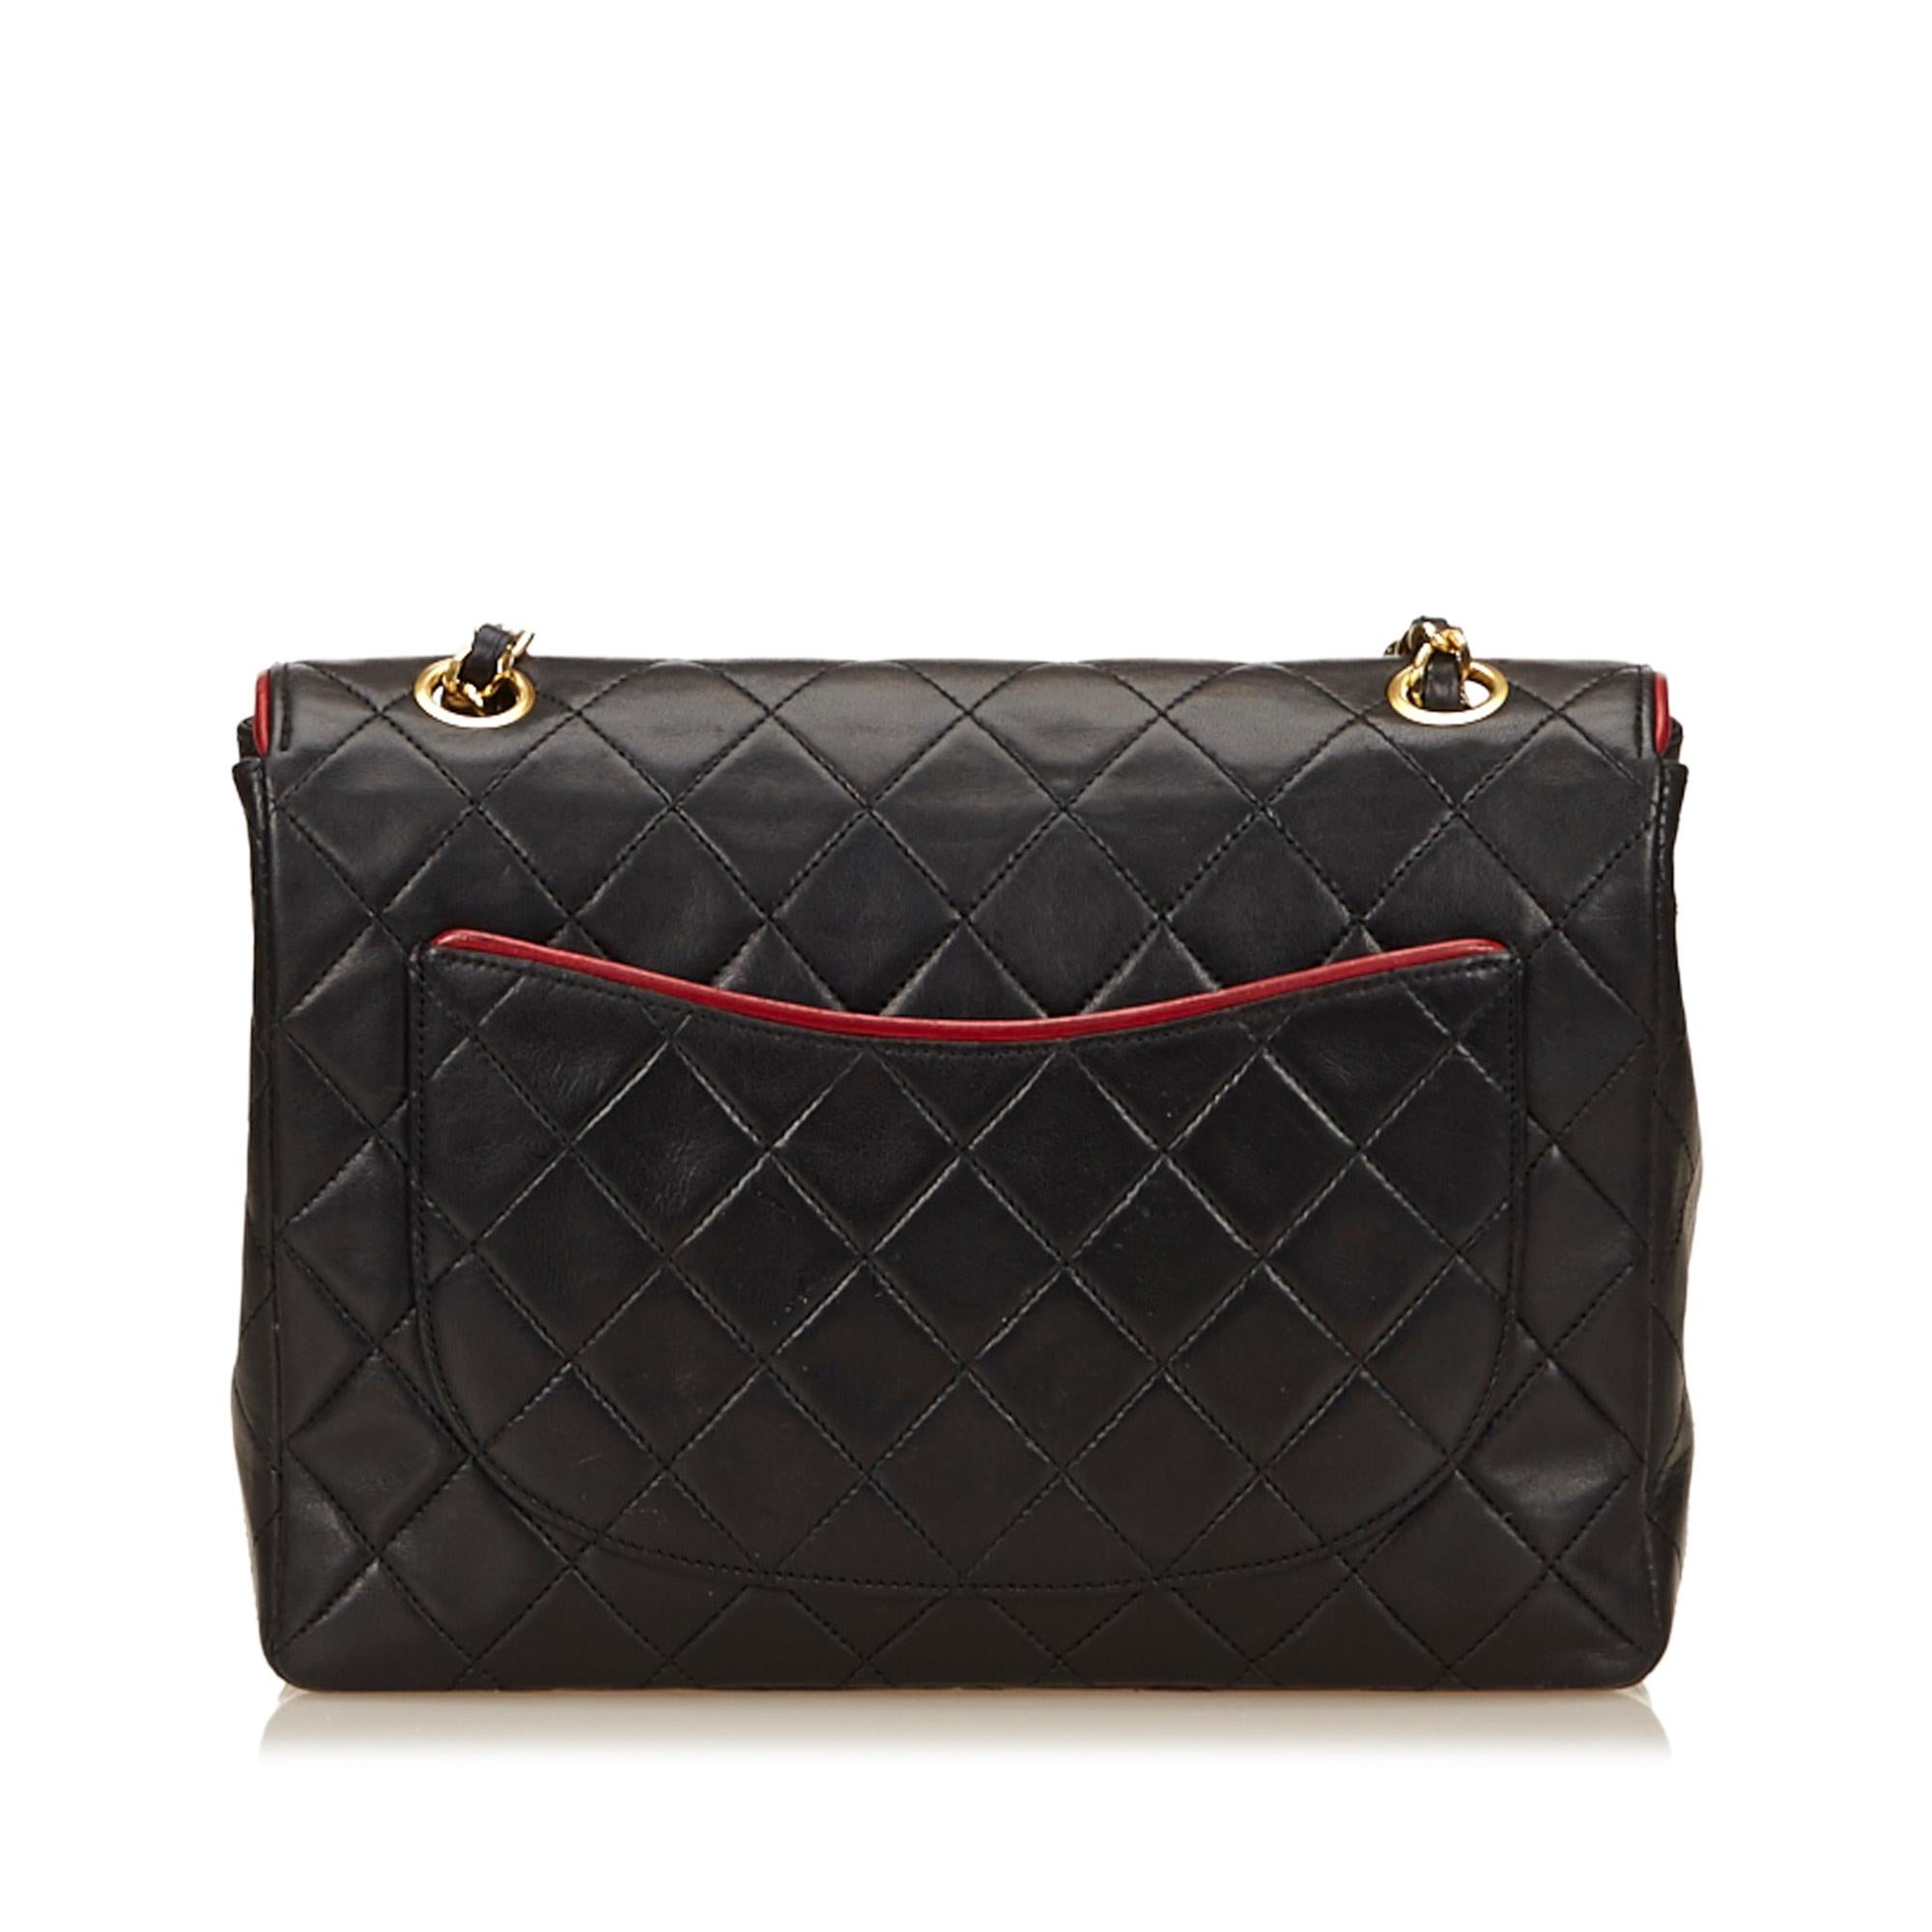 Chanel Quilted Leather Flap Bag (Schwarz)